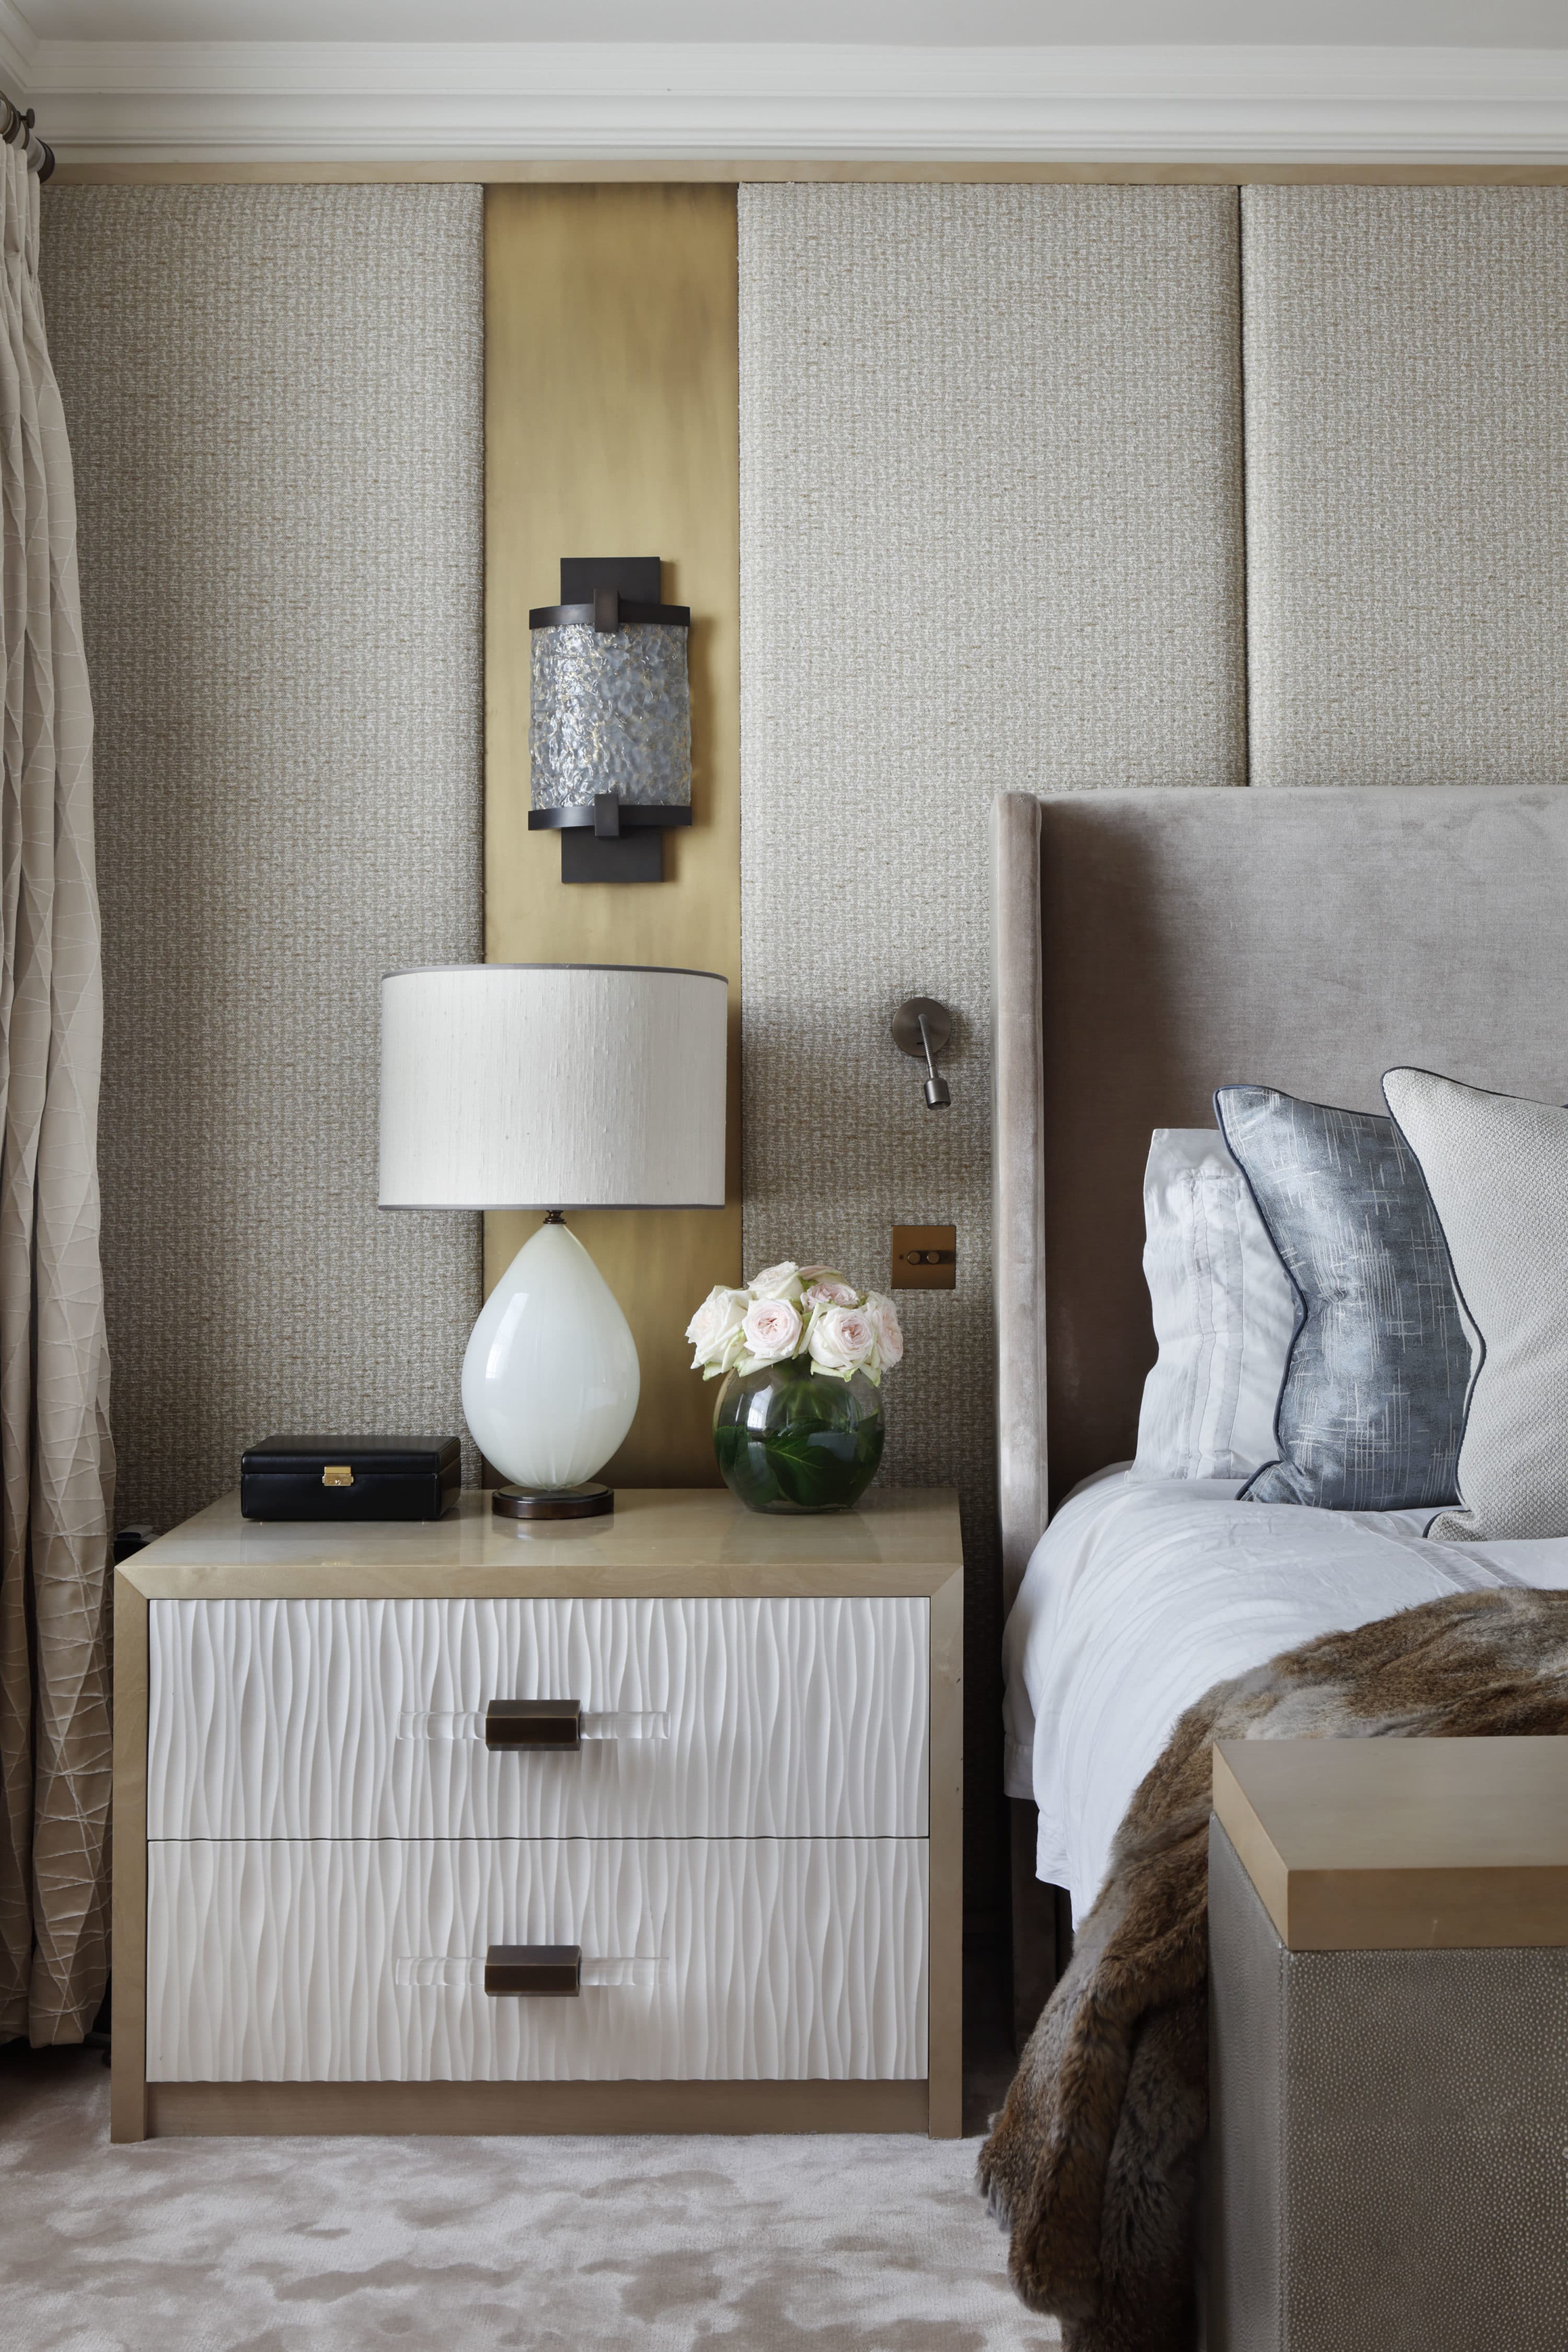 Bespoke beside table and padded integrated headboard